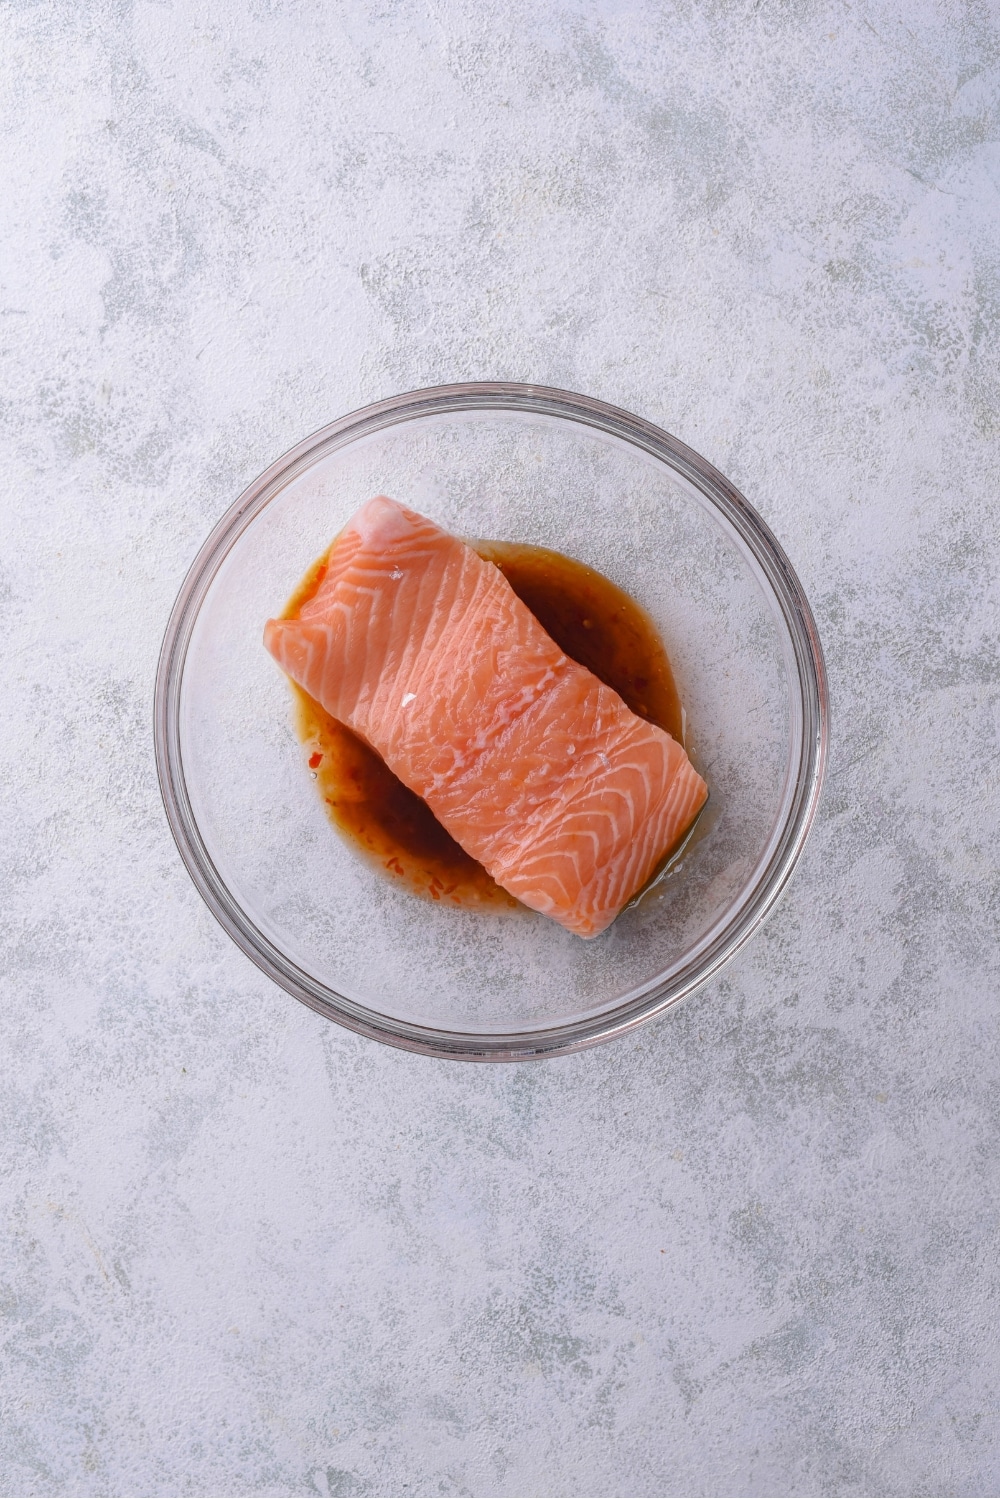 A glass bowl with a salmon fillet marinating in teriyaki sauce.